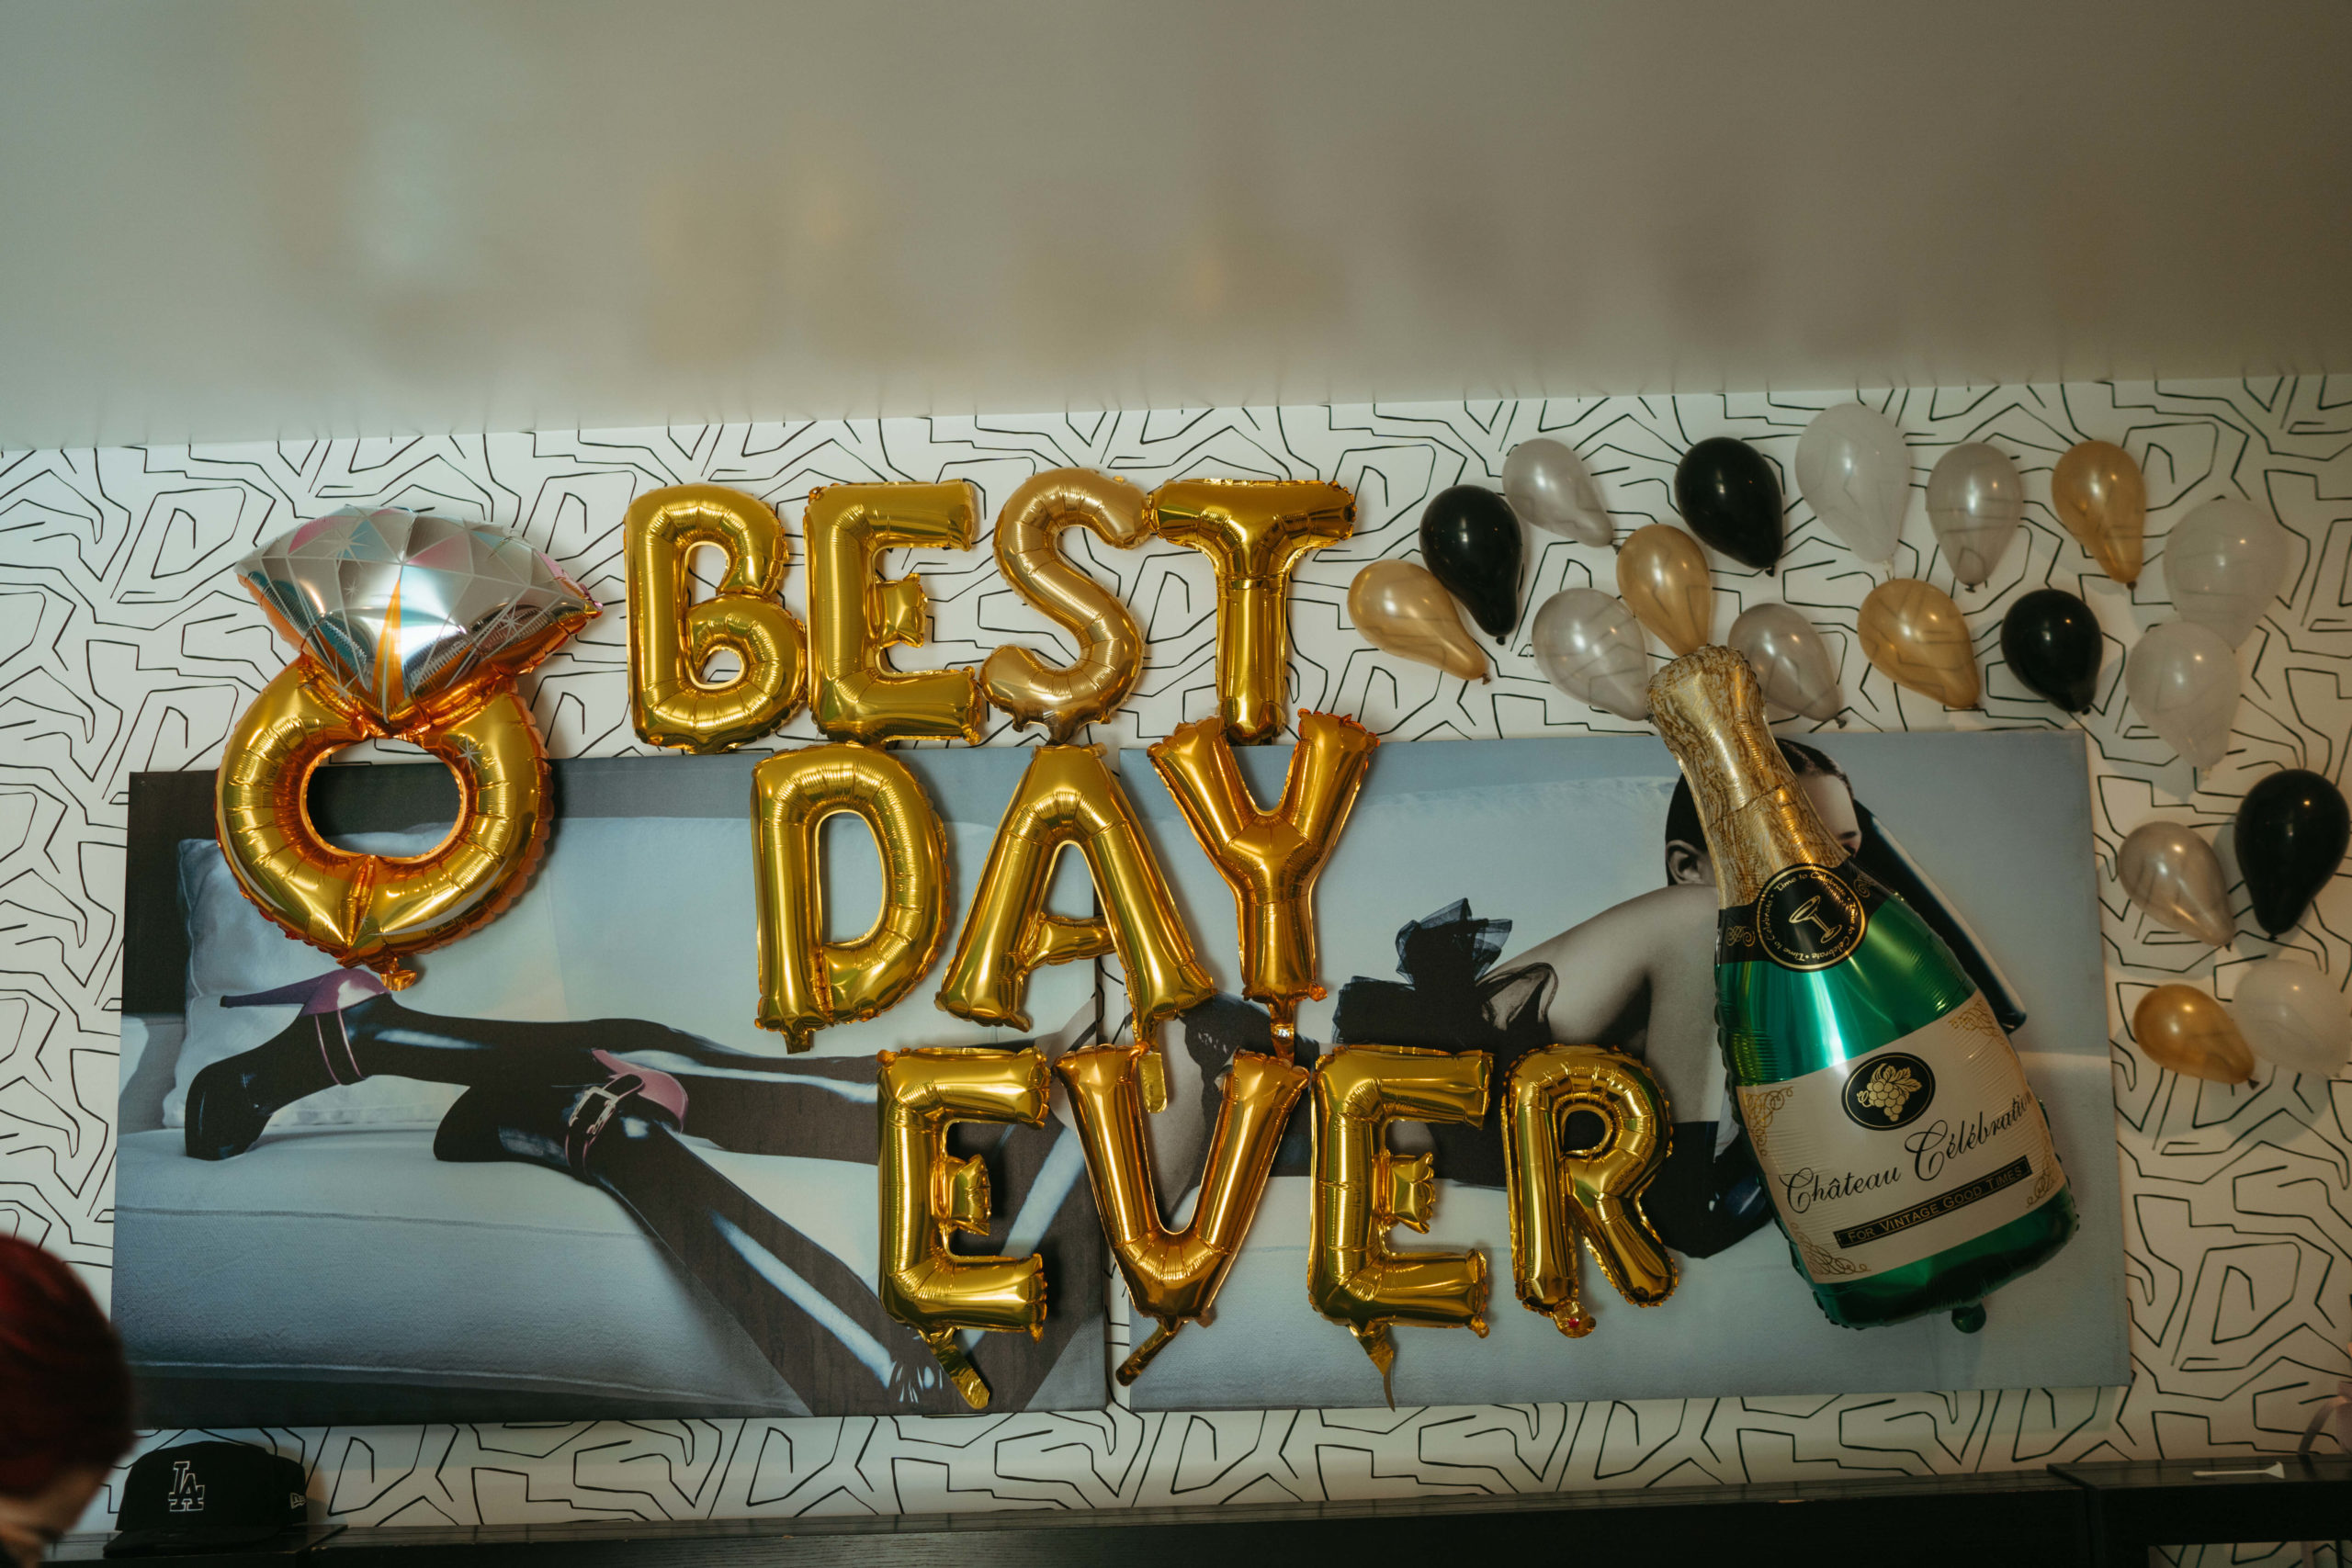 Best Day Ever balloons placed on airbnb wall